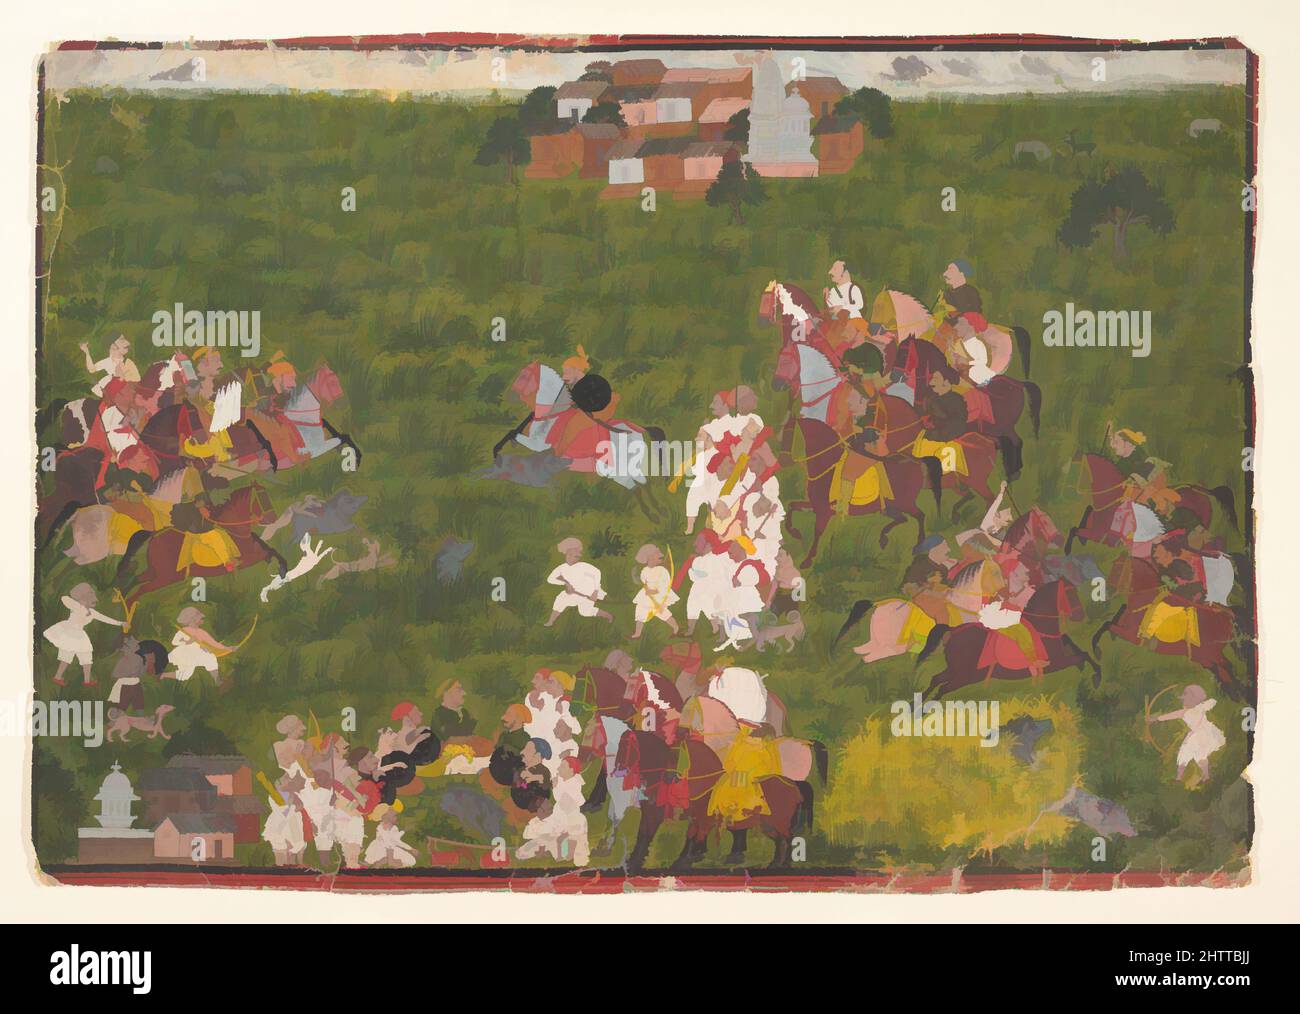 Art inspired by Maharana Sangram Singh Hunting Wild Boar, ca. 1725, Western India, Rajasthan, Udaipur, Ink and opaque watercolor on paper, 12 1/4 x 17 13/16 in. (31.1 x 45.2 cm), Paintings, Riding a light gray stallion, the maharana of Mewar, Sangram Singh, appears in four scenes, Classic works modernized by Artotop with a splash of modernity. Shapes, color and value, eye-catching visual impact on art. Emotions through freedom of artworks in a contemporary way. A timeless message pursuing a wildly creative new direction. Artists turning to the digital medium and creating the Artotop NFT Stock Photo